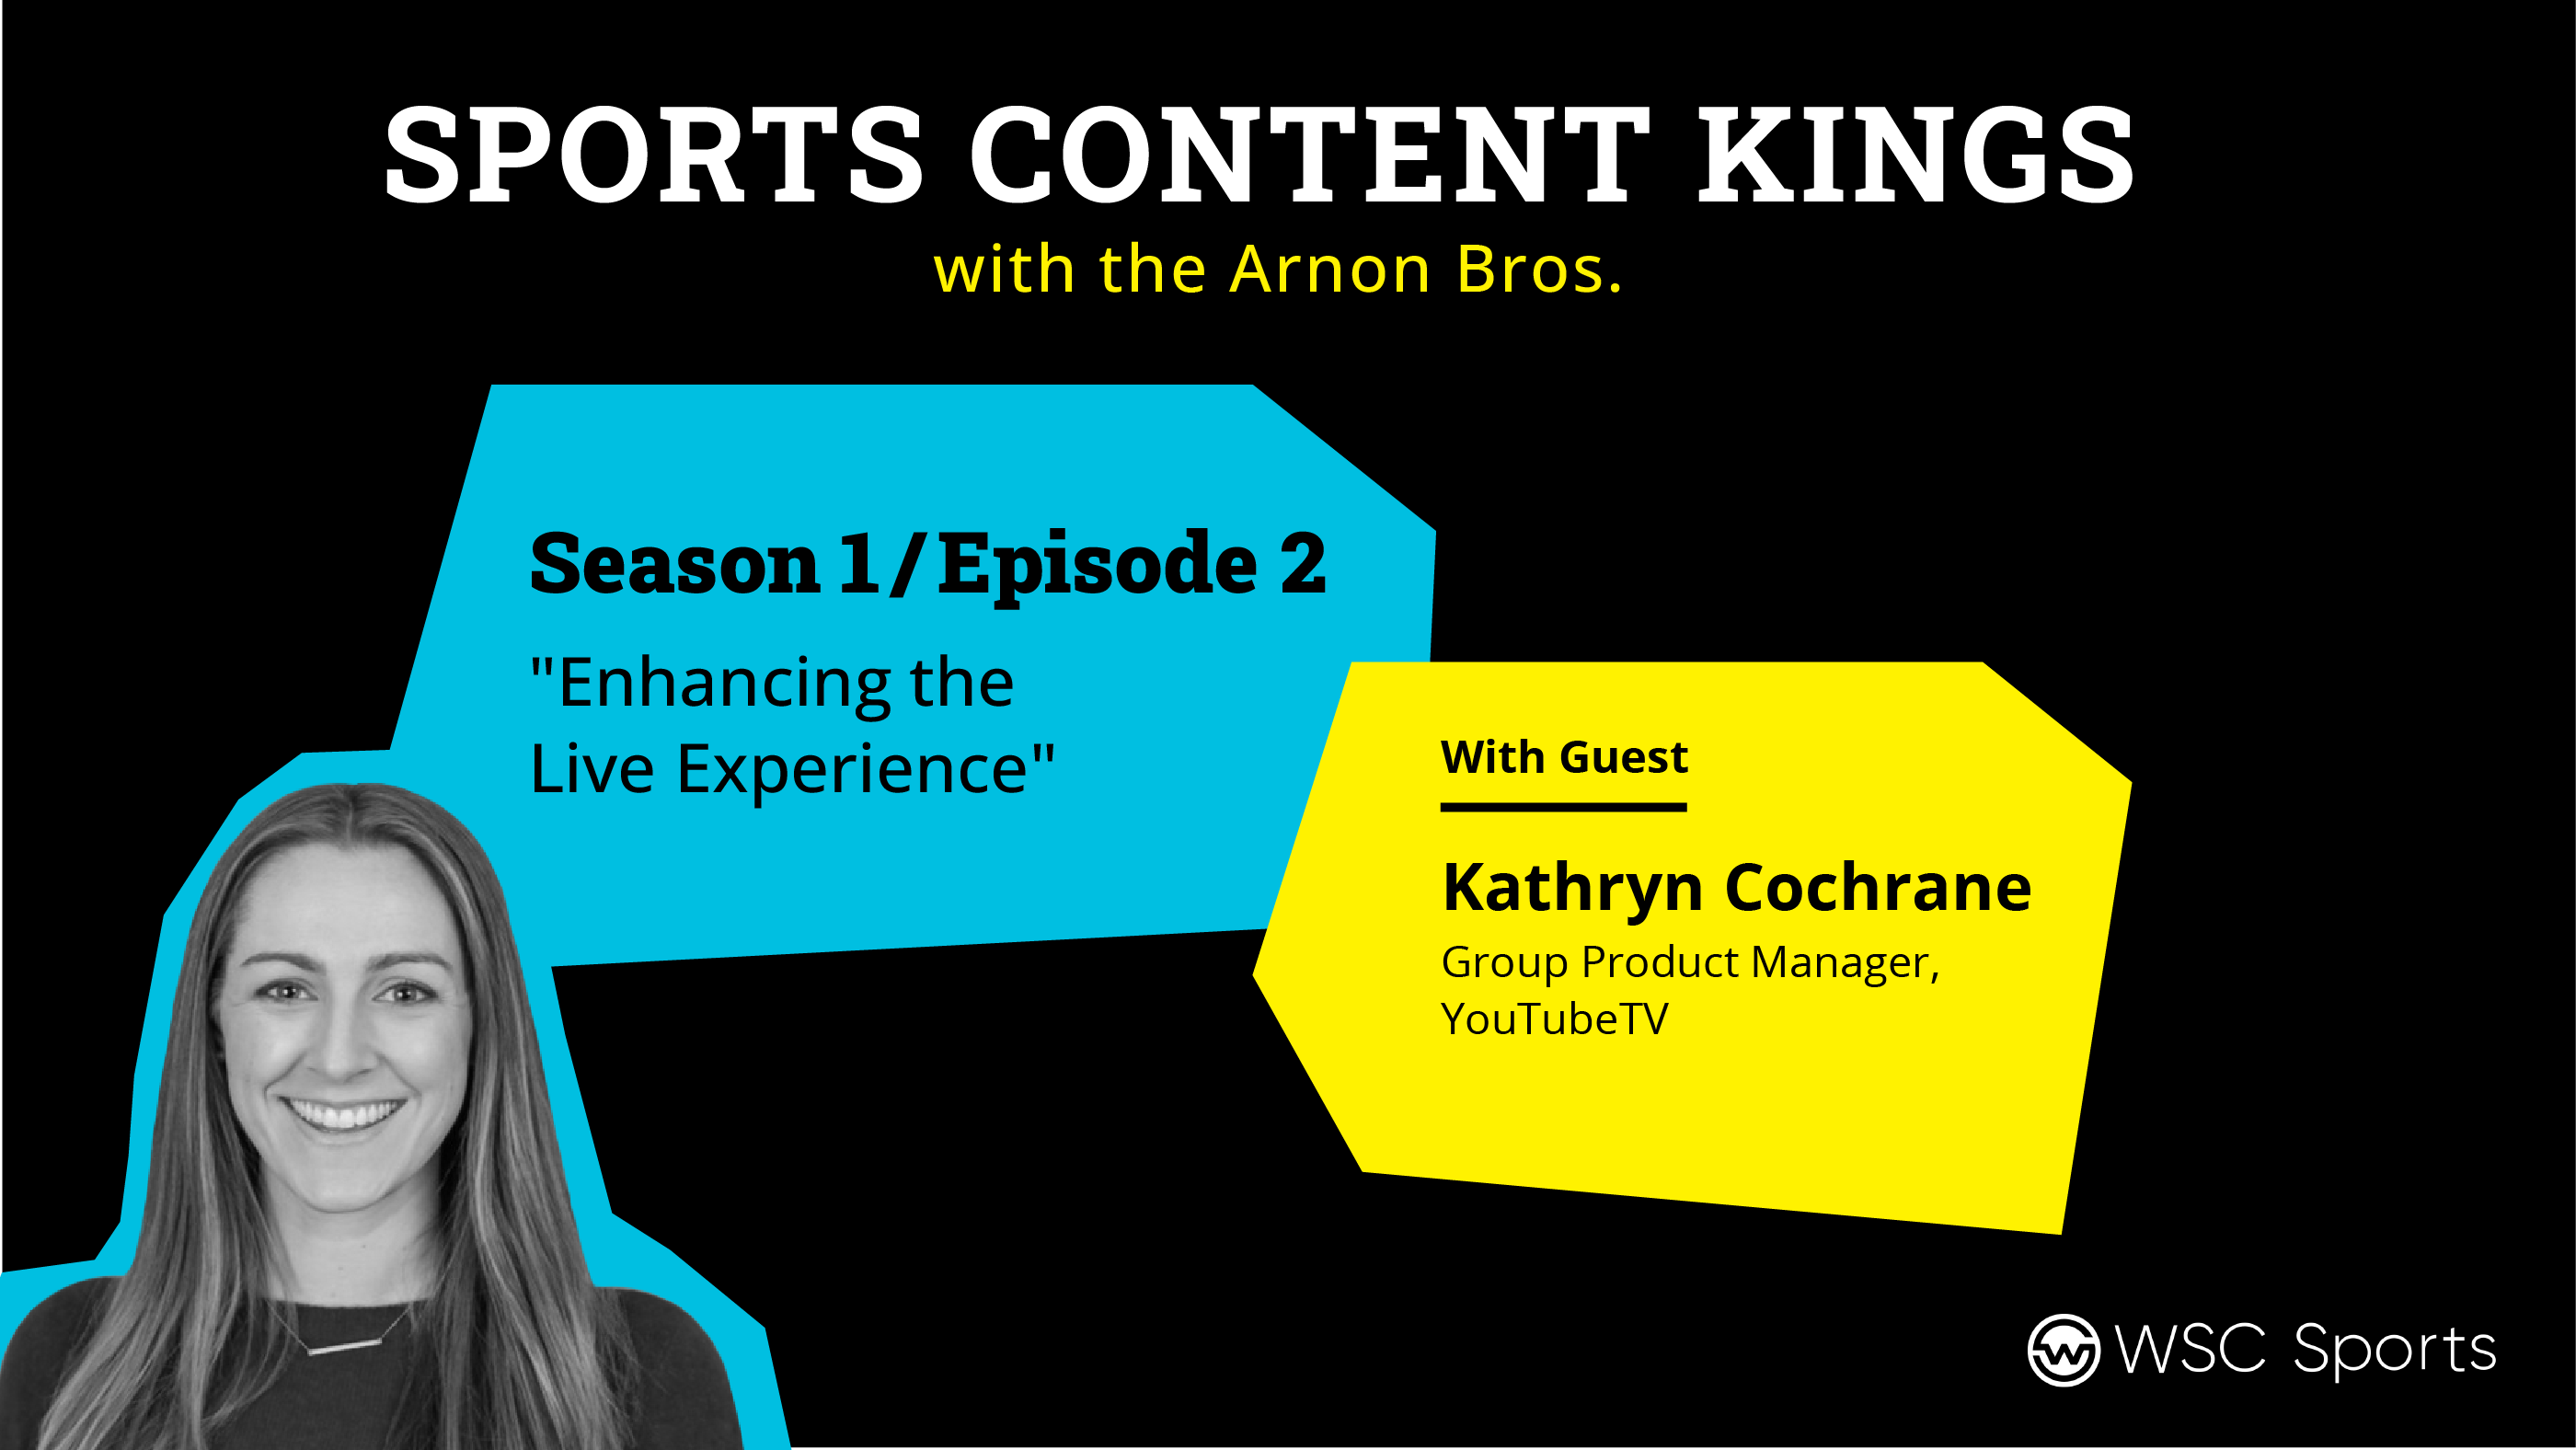 Picture of Kathryn Cochrane with text announcing the season 1 episode 2 podcast of Sports Content Kings.